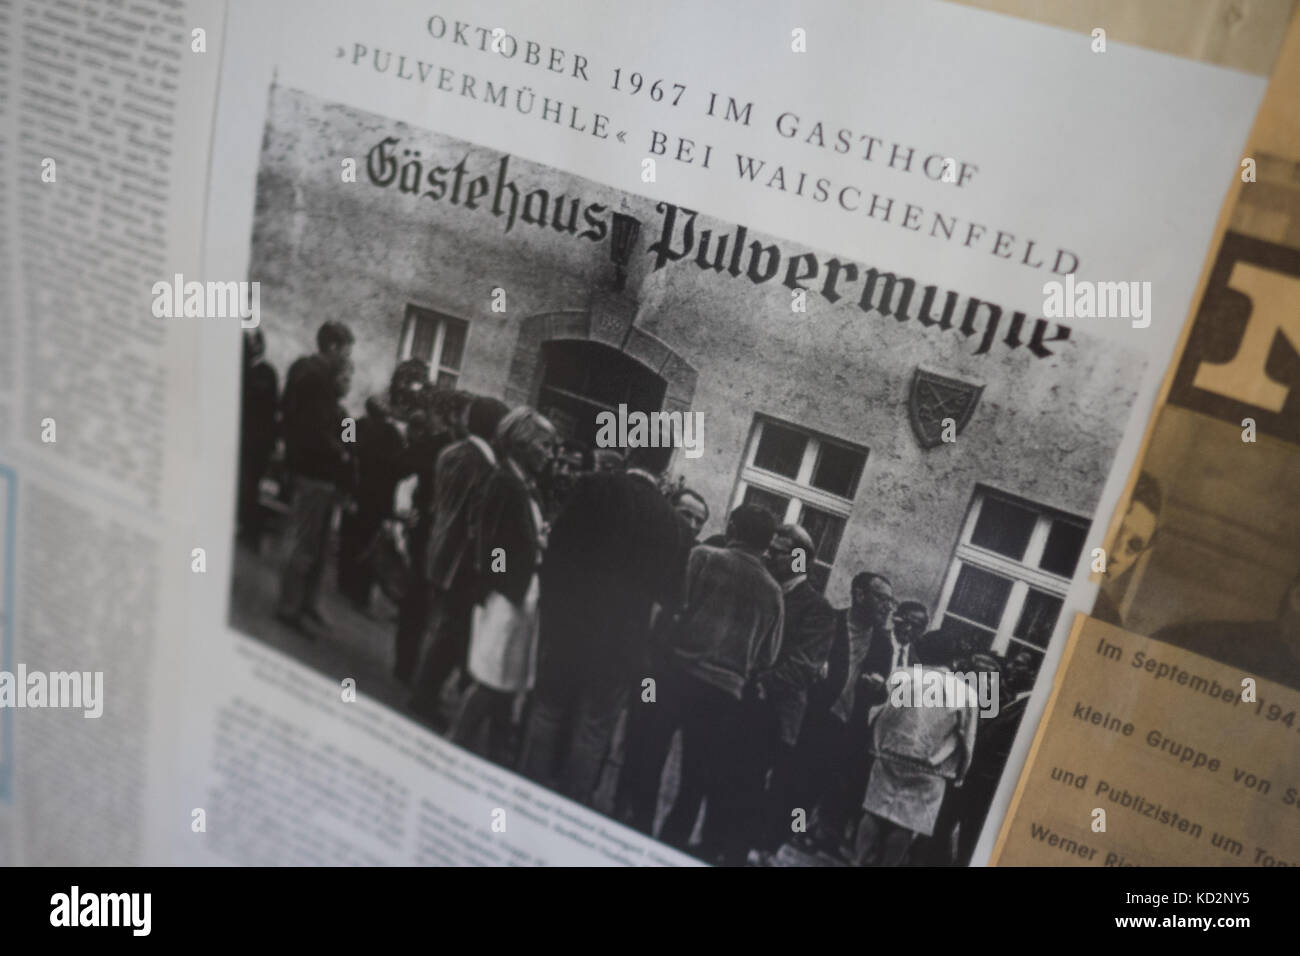 Waischenfeld, Germany. 9th Oct, 2017. An old newspaper article shows the final meeting of the German writers' group Gruppe 47 (Group 47) outside the Gasthof Pulvermuehle hotel, pictured in Waischenfeld, Germany, 9 October 2017. The German writers' group Gruppe 47 (Group 47) met for the last time at the Gasthof Pulvermuehle hotel in October 1967. Credit: Nicolas Armer/dpa/Alamy Live News Stock Photo